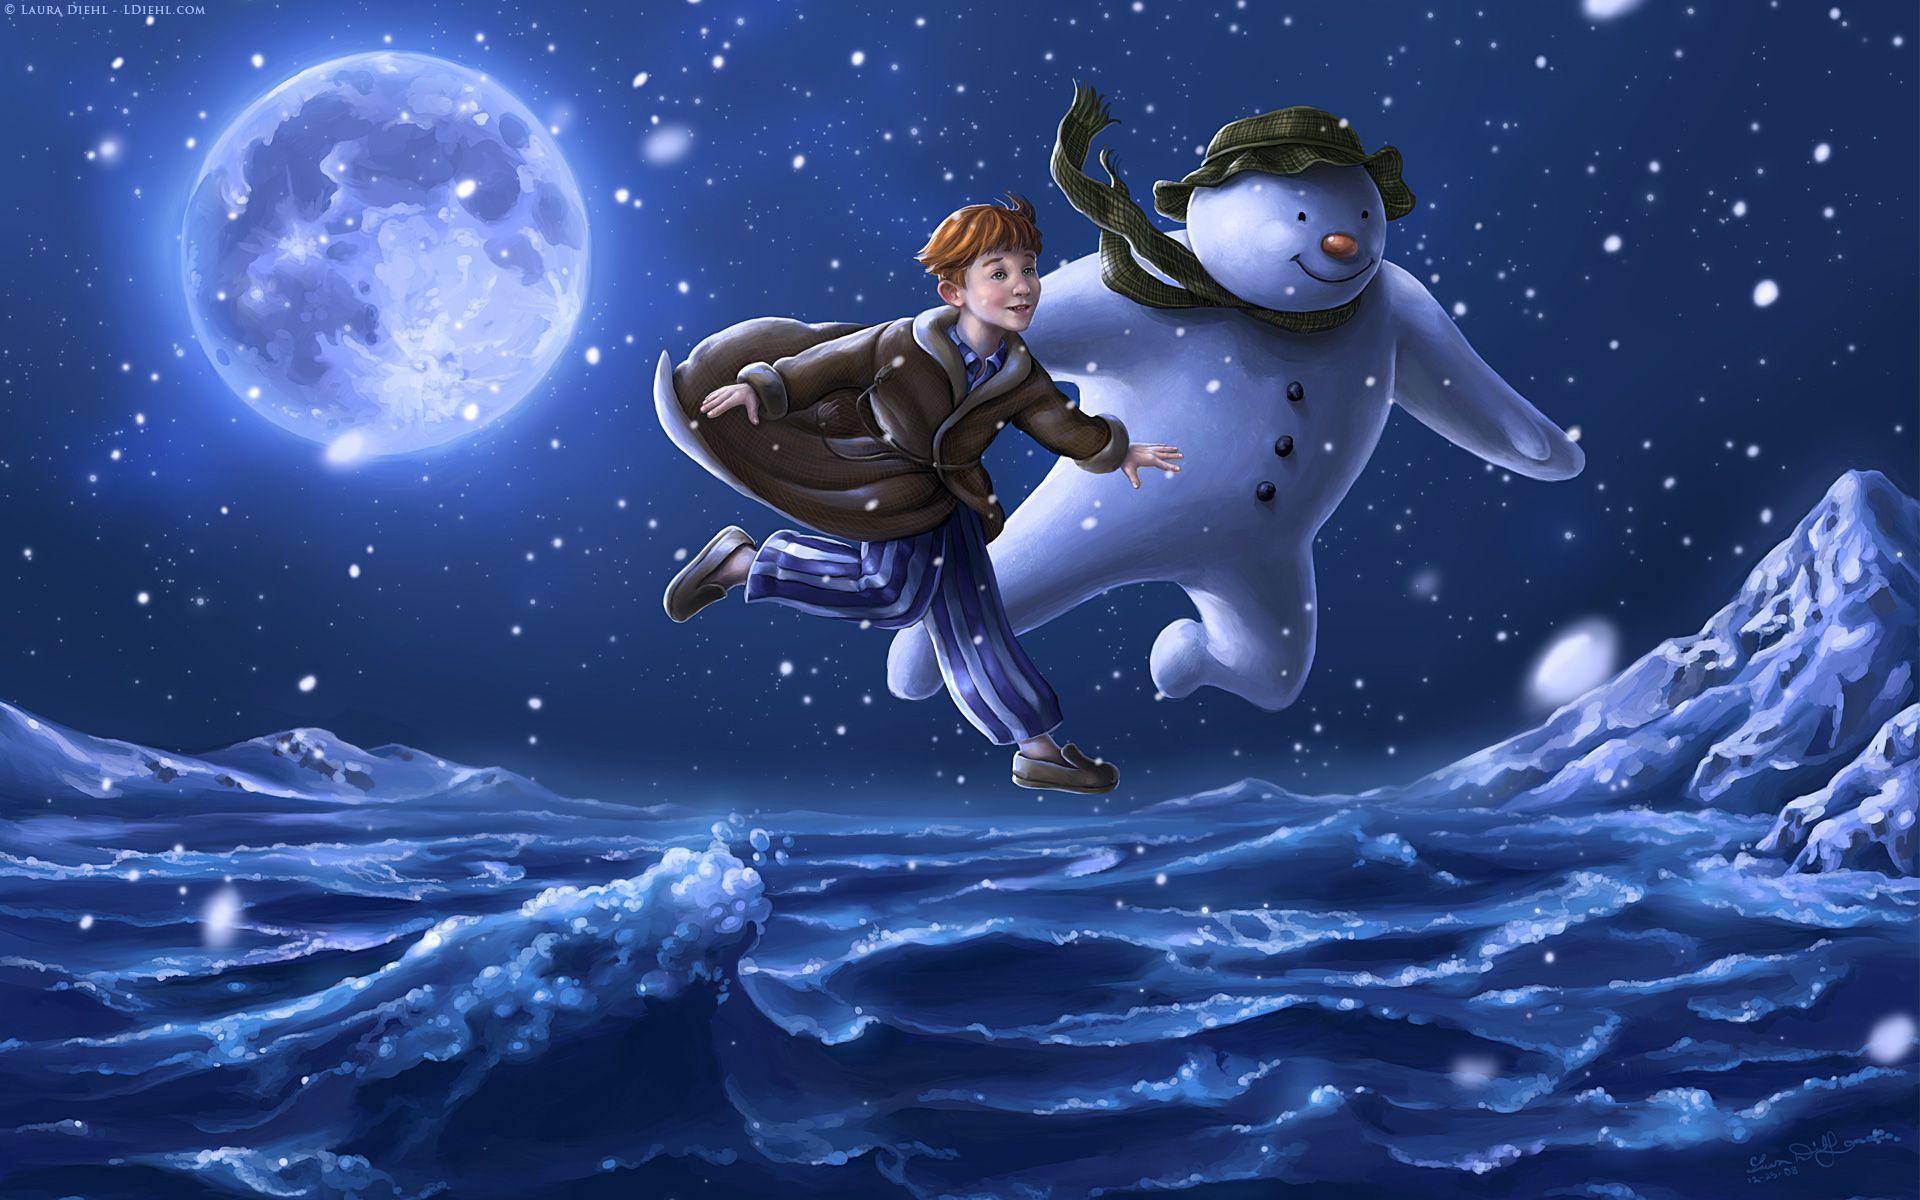 The Snowman Flying In The Air Computer Background Wallpaper